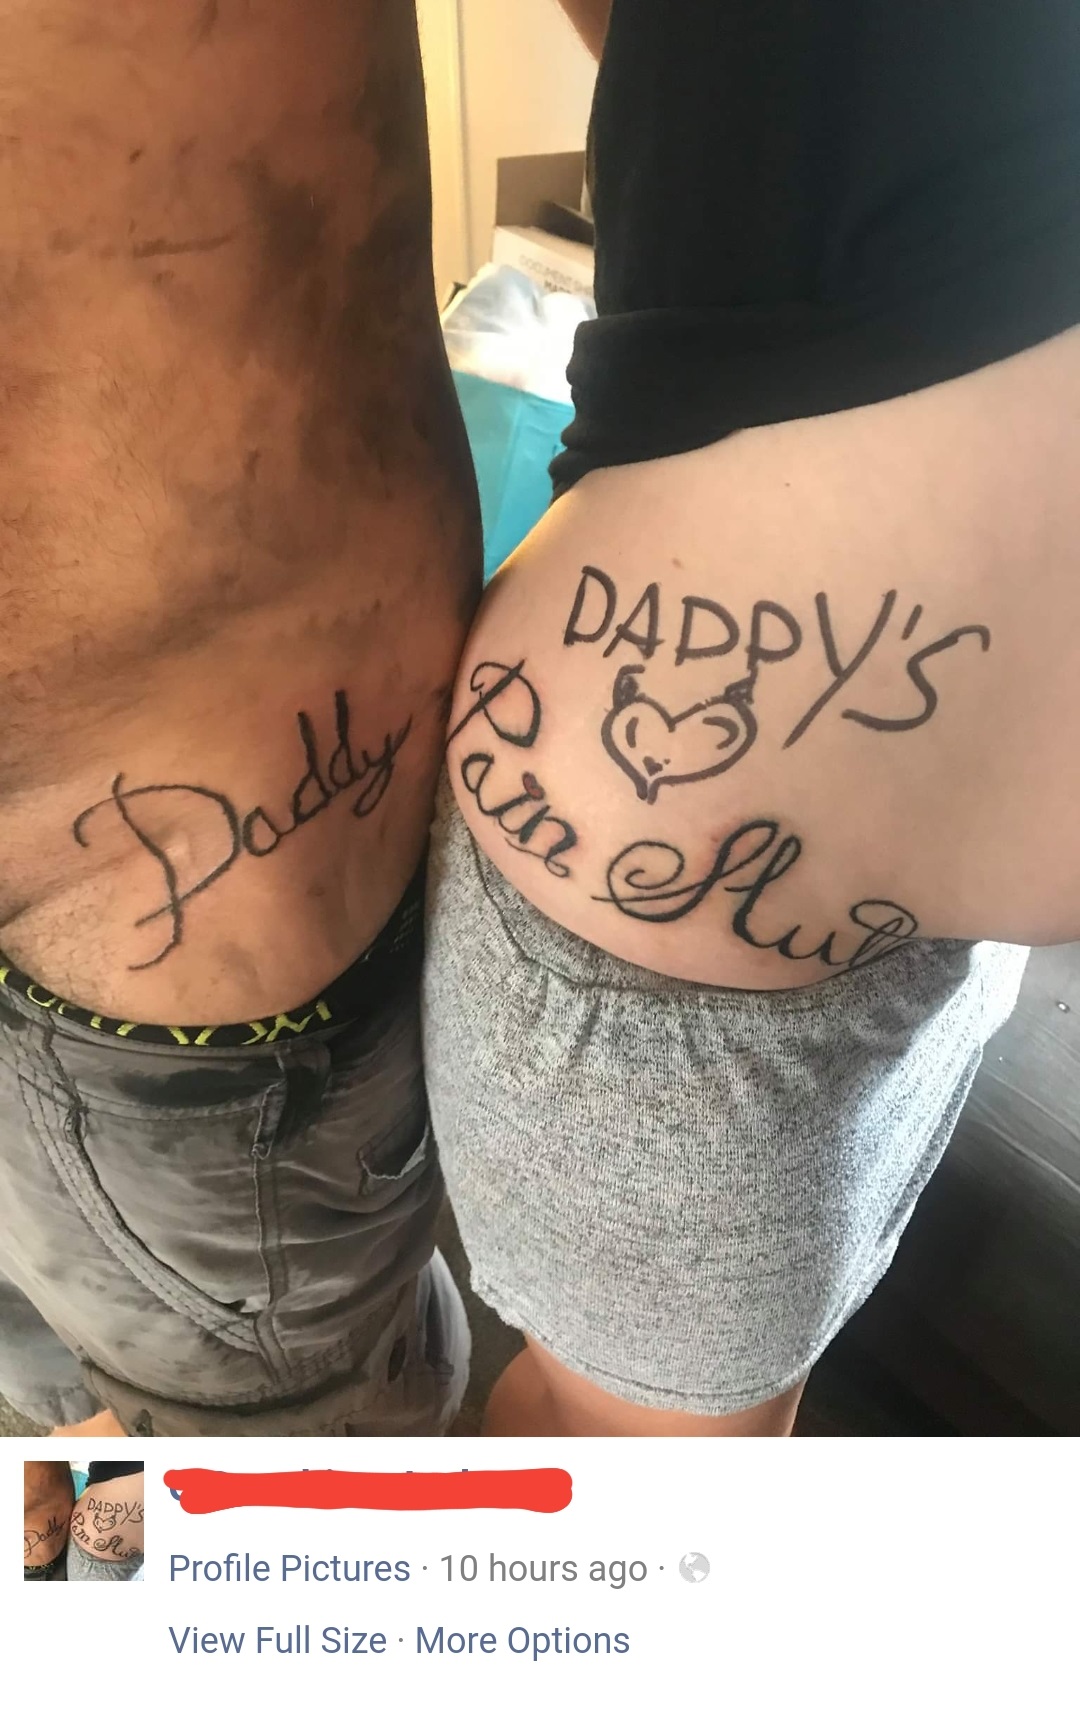 tattoo - Daddy'S Daddy Won Dadpva Profile Pictures 10 hours ago View Full Size More Options